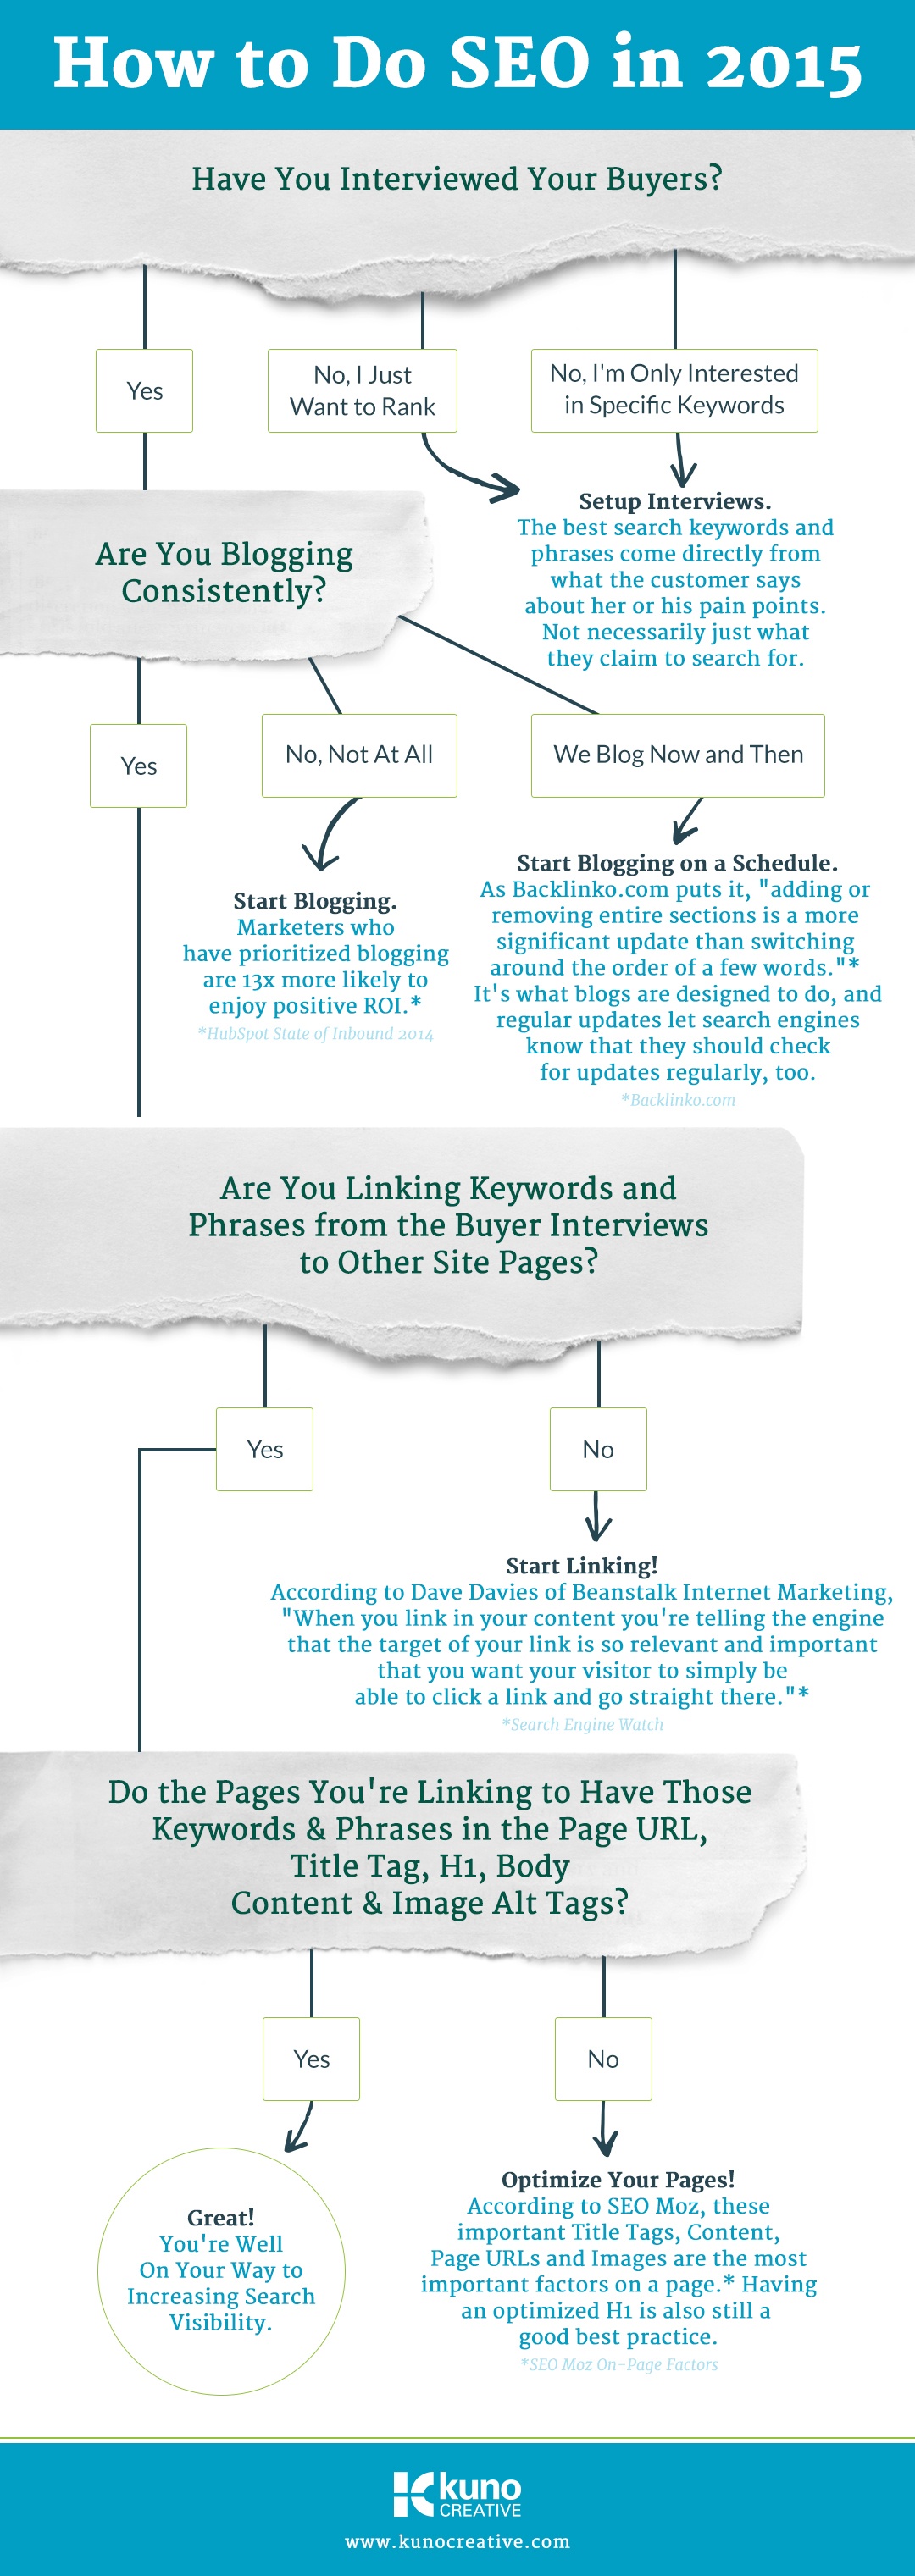 How to Do SEO in 2015